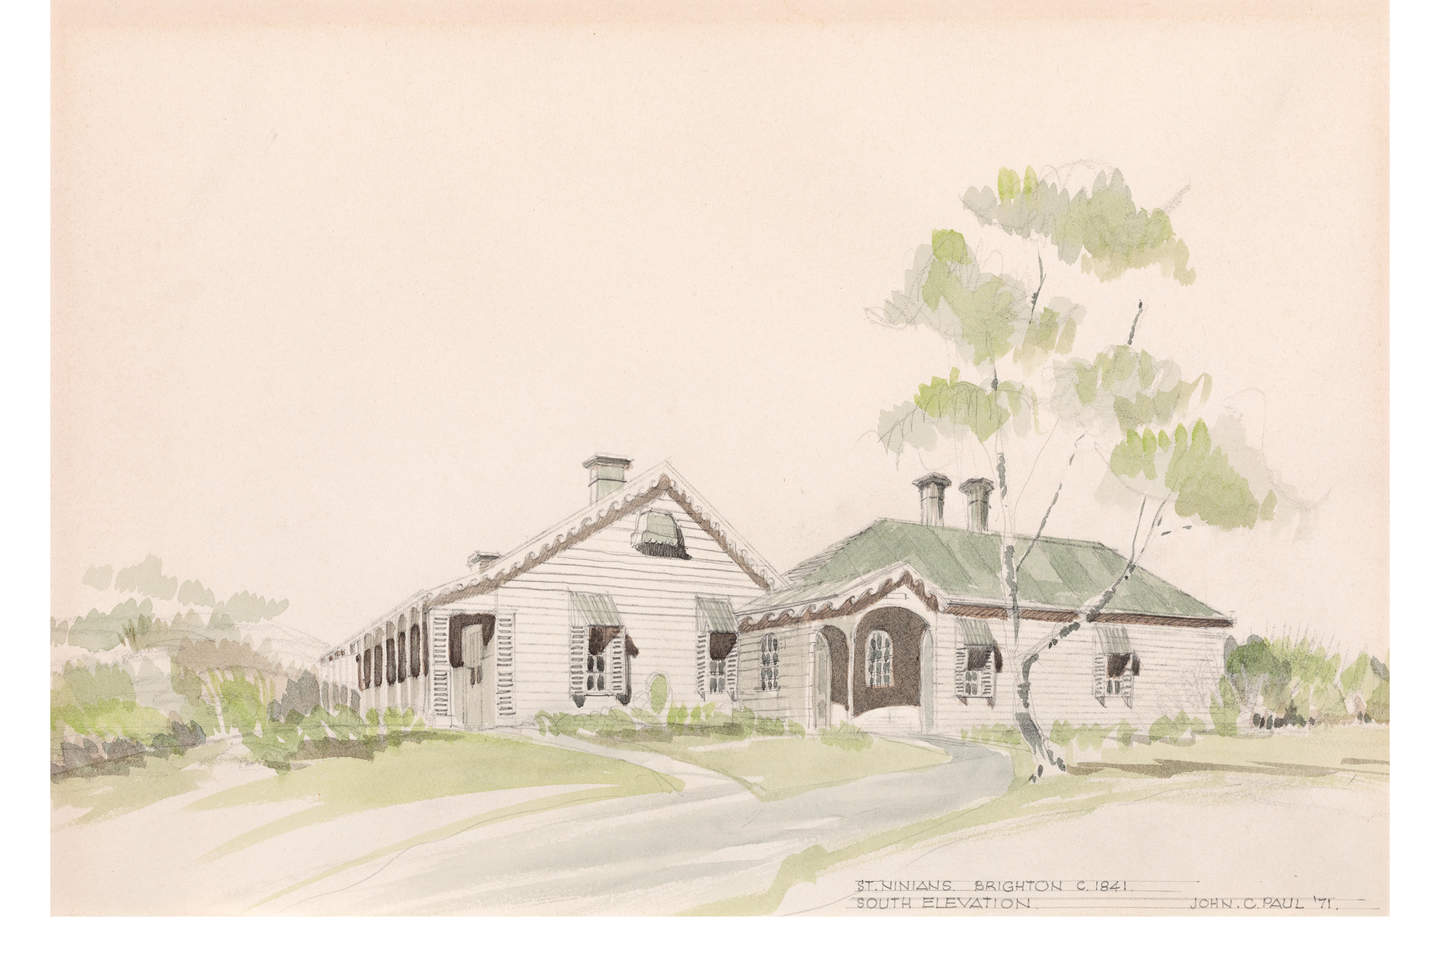 Watercolour of a white weatherboard house with a green roof surrounded by vegetation.